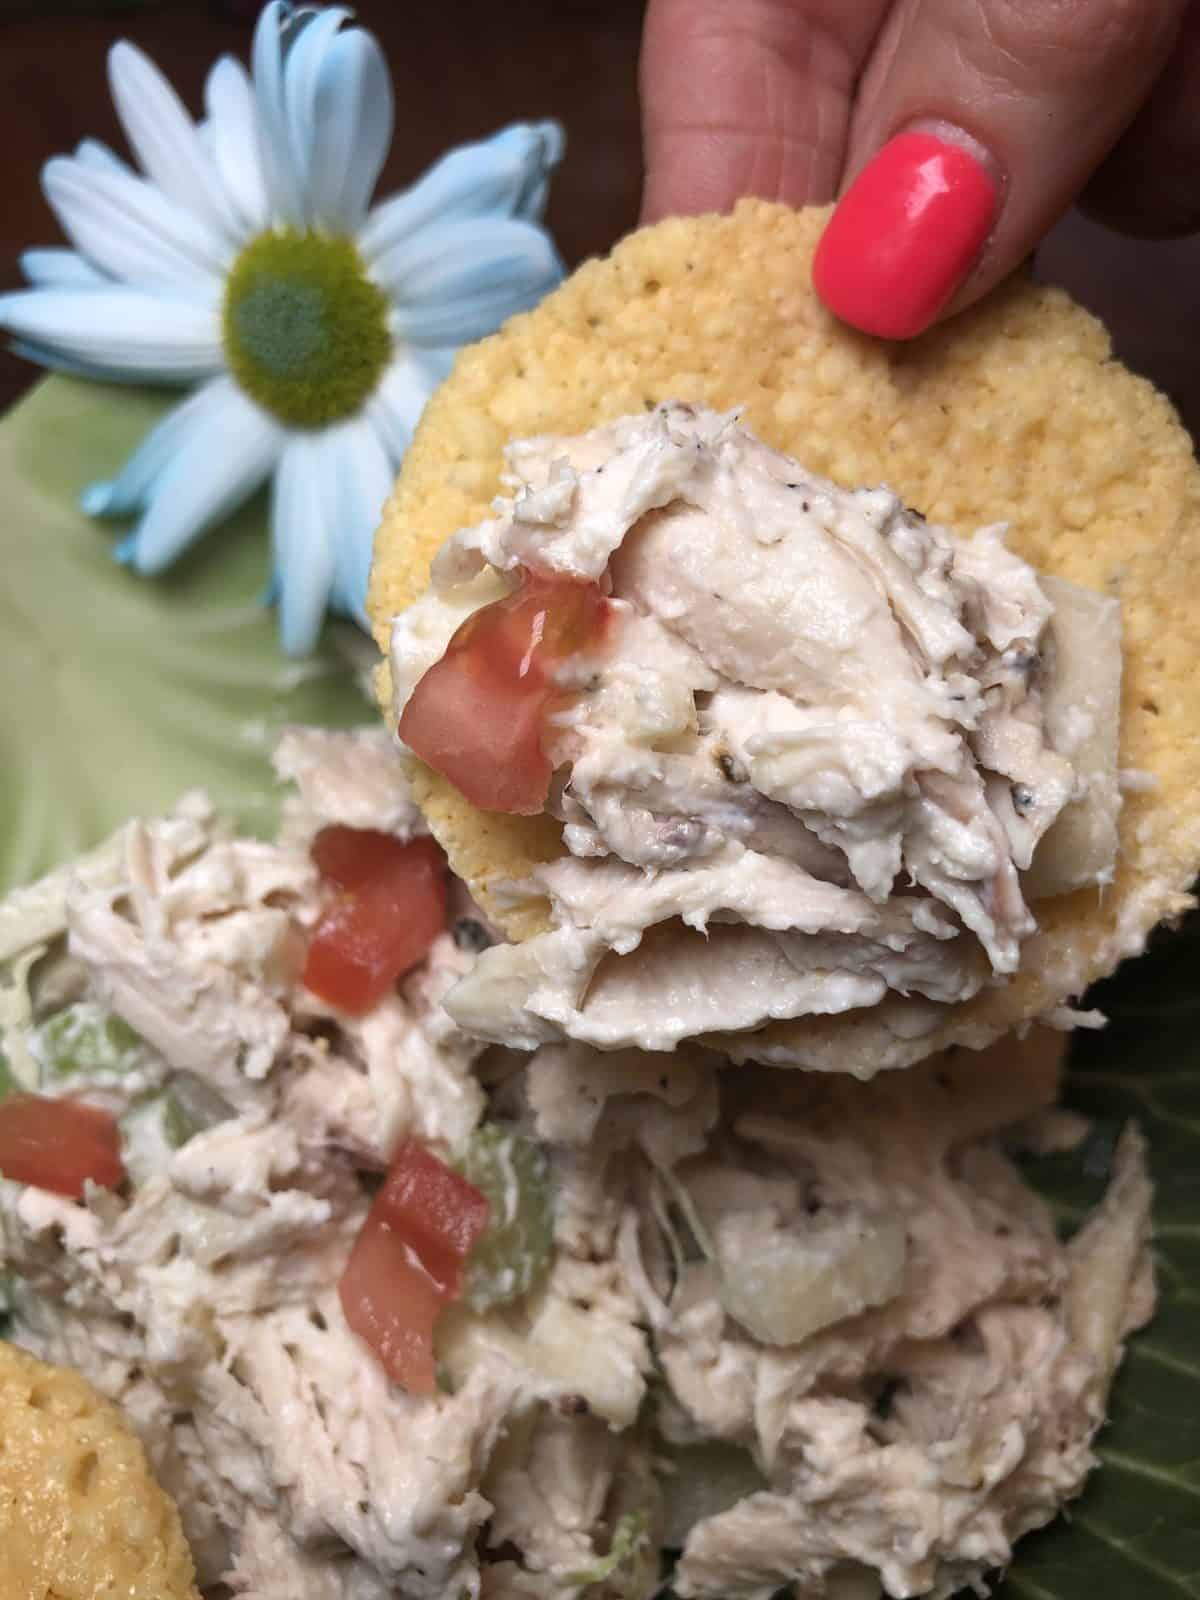 Chicken Salad on a Parmesan Crisp being held by a hand over a dollop of WW chicken salad